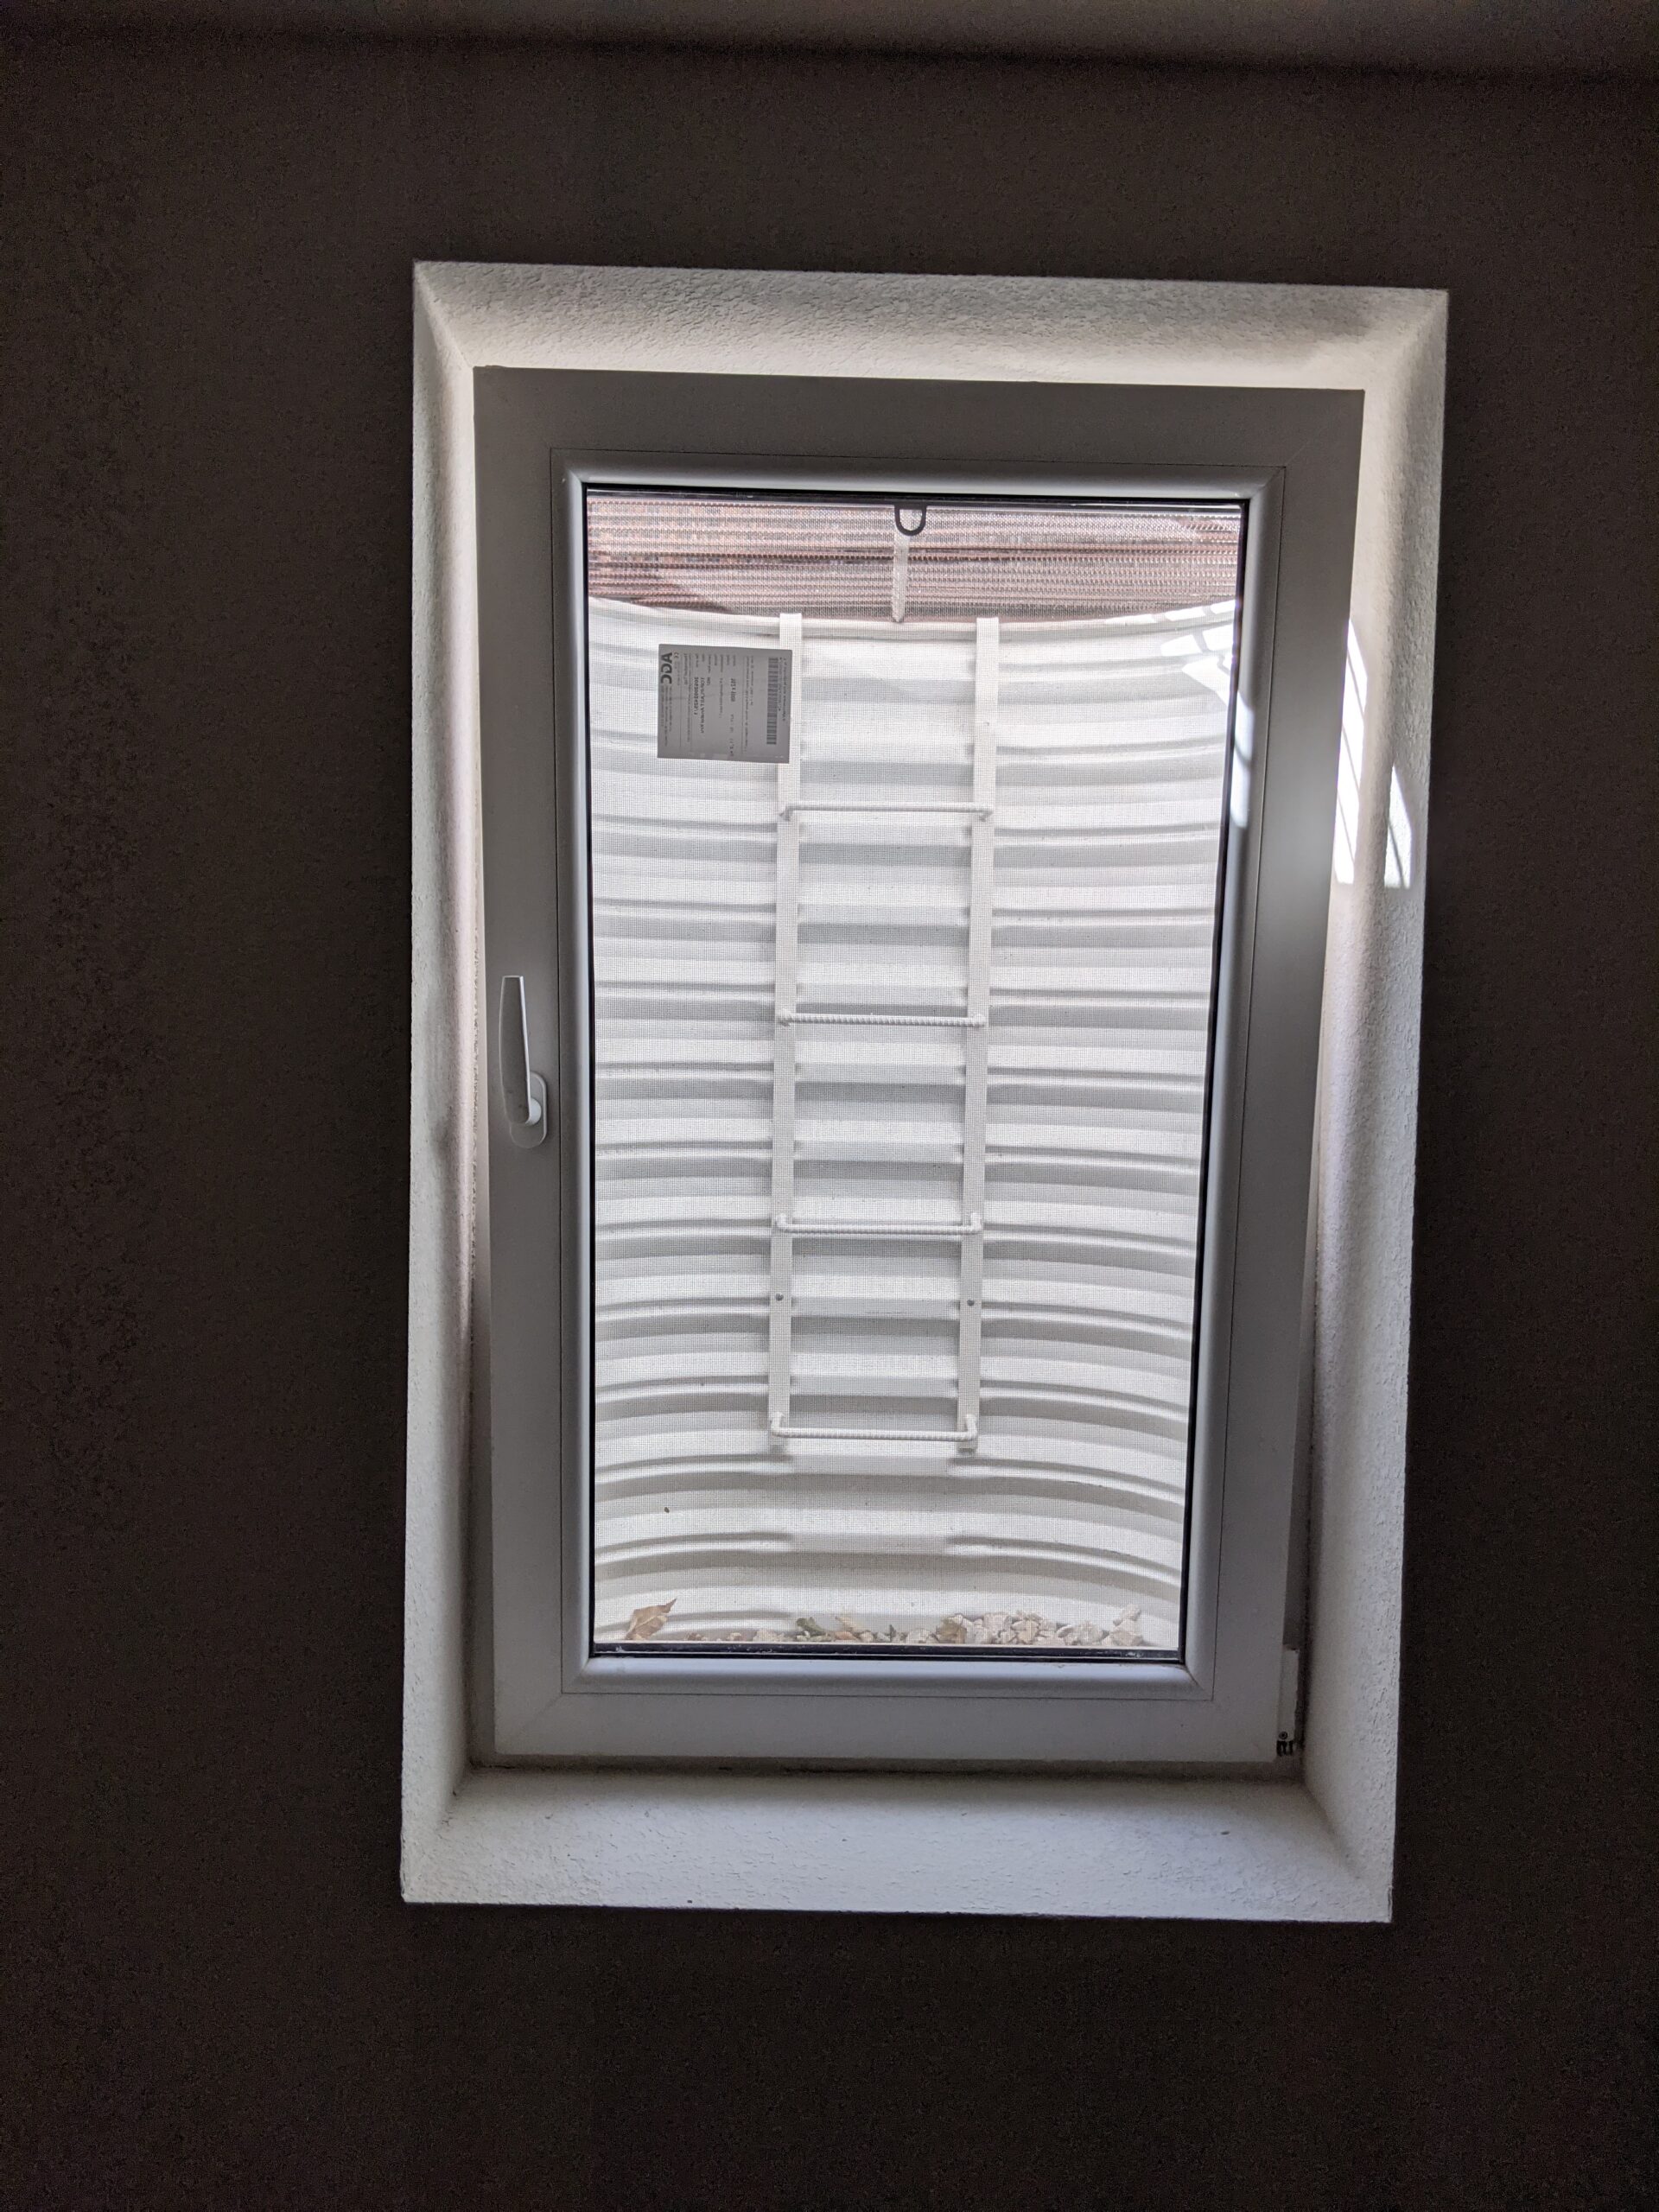 BONUS FEATURE: If you turn the handle all the way up, the top of the window tilts into the room while pins are still engaged to lock it into the frame and prevent it from being opened. You can see light coming in around the top two-thirds of this vented window. This top vent helps to increase circulation of fresh air in the basement and prevent musty smells while remaining securely closed.